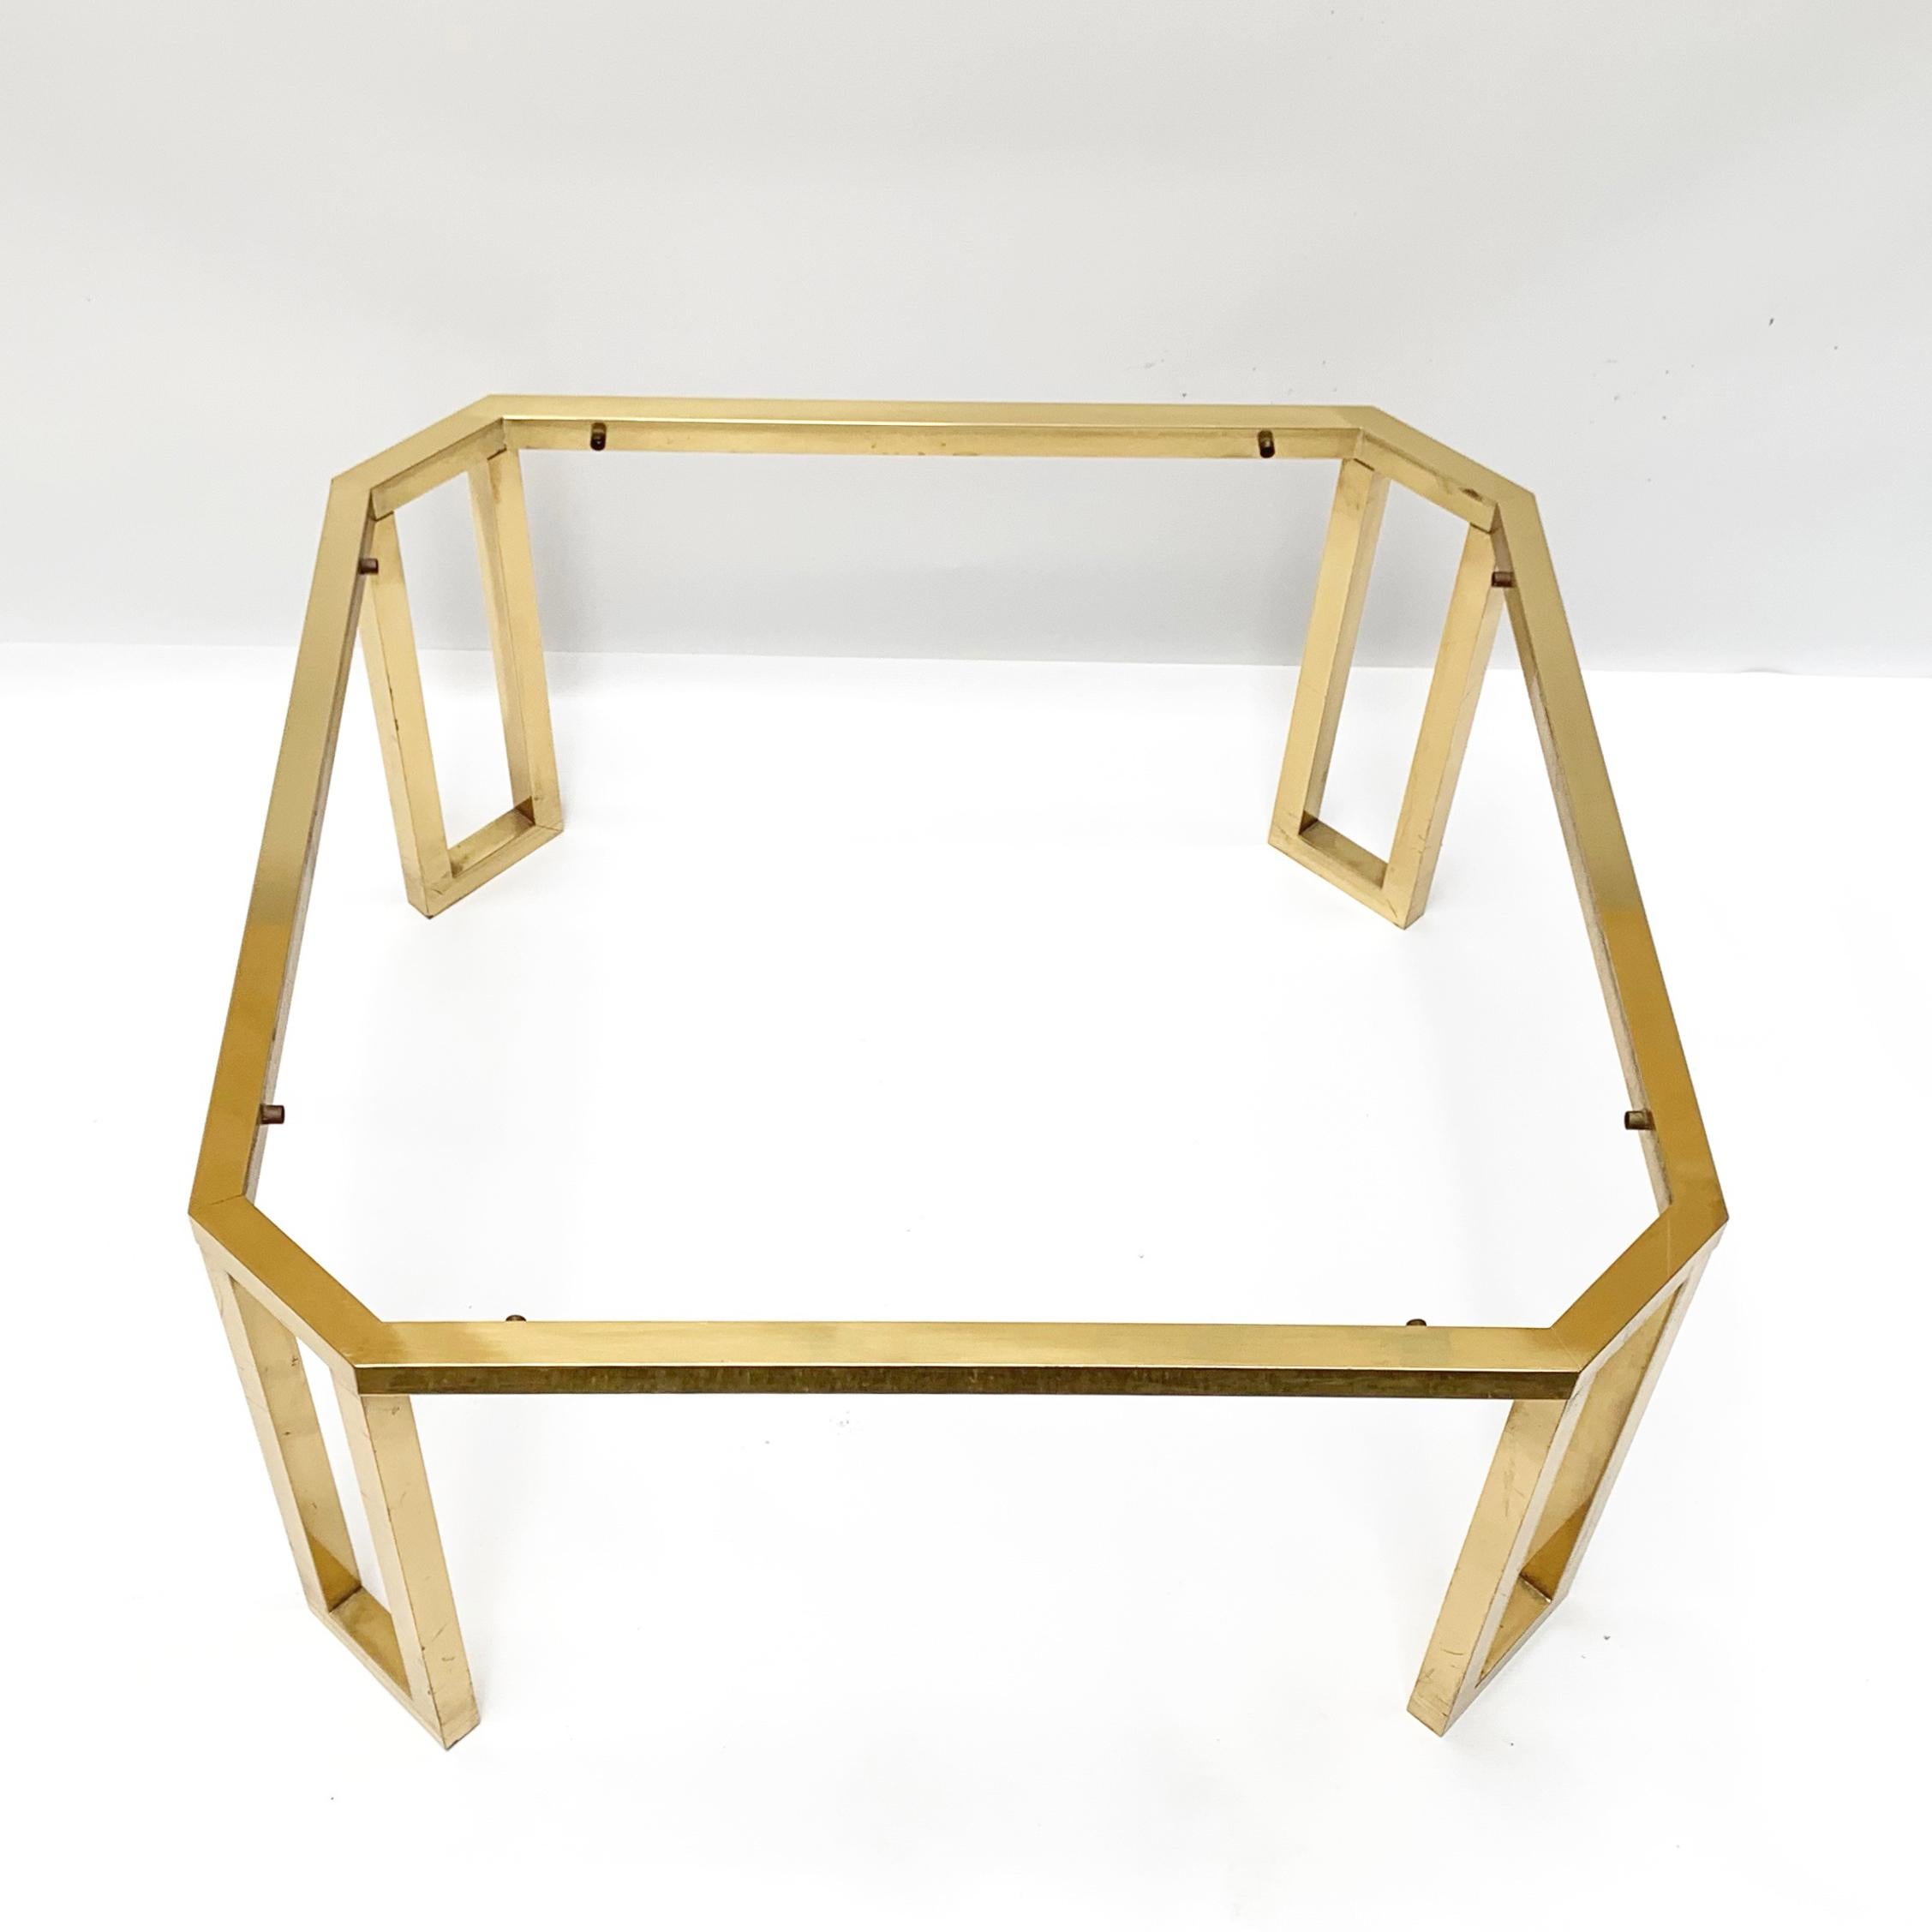 Maison Jansen Octagonal Tables in Brass and Glass, France, 1970s Coffee Tables For Sale 4